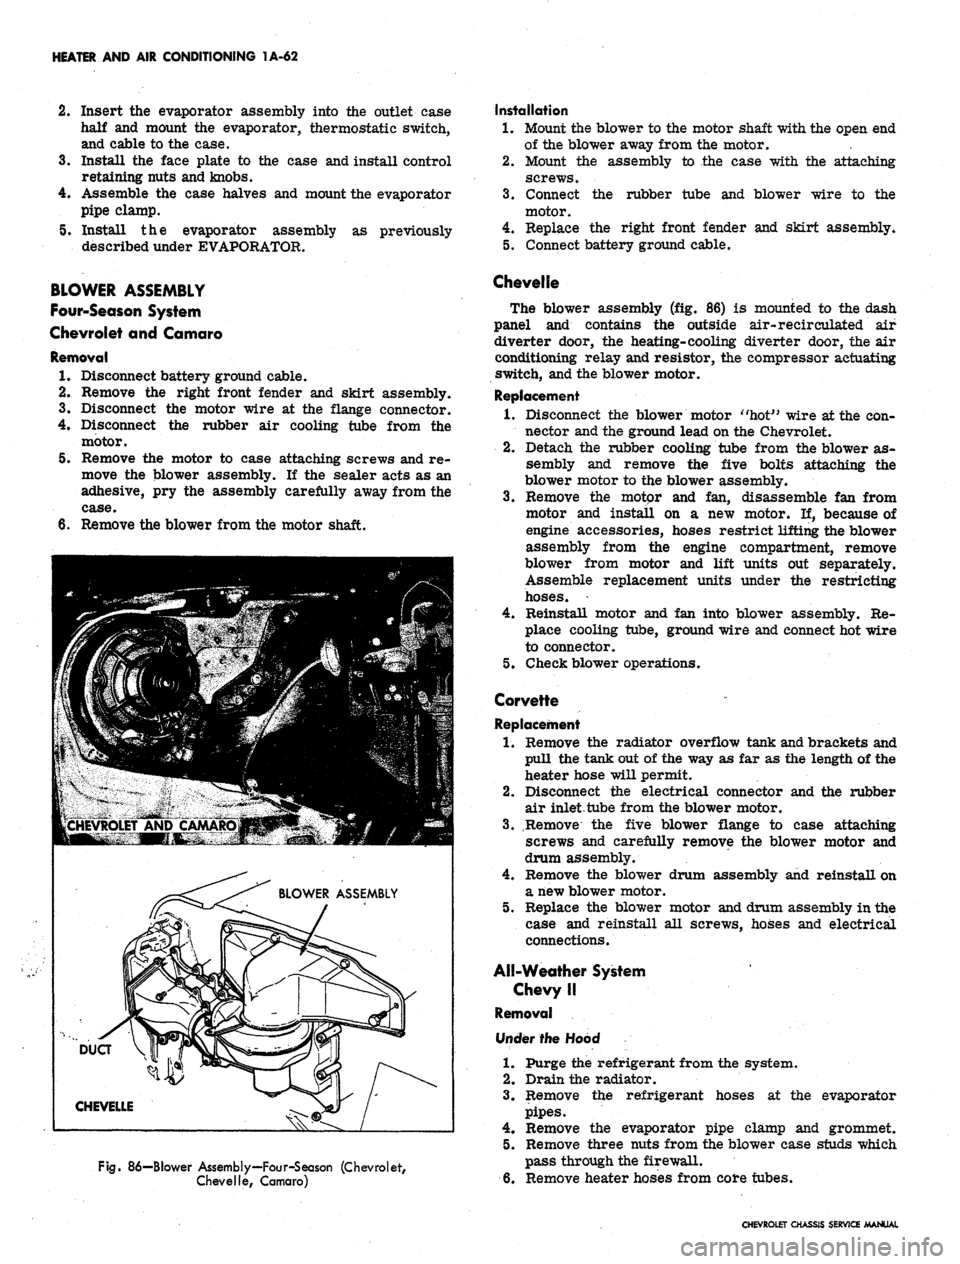 CHEVROLET CAMARO 1967 1.G Chassis Service Manual 
HEATER AND AIR CONDITIONING 1A-62

2.
 Insert the evaporator assembly into the outlet case

half and mount the evaporator, thermostatic switch,

and cable to the case.

3.
 Install the face plate to 